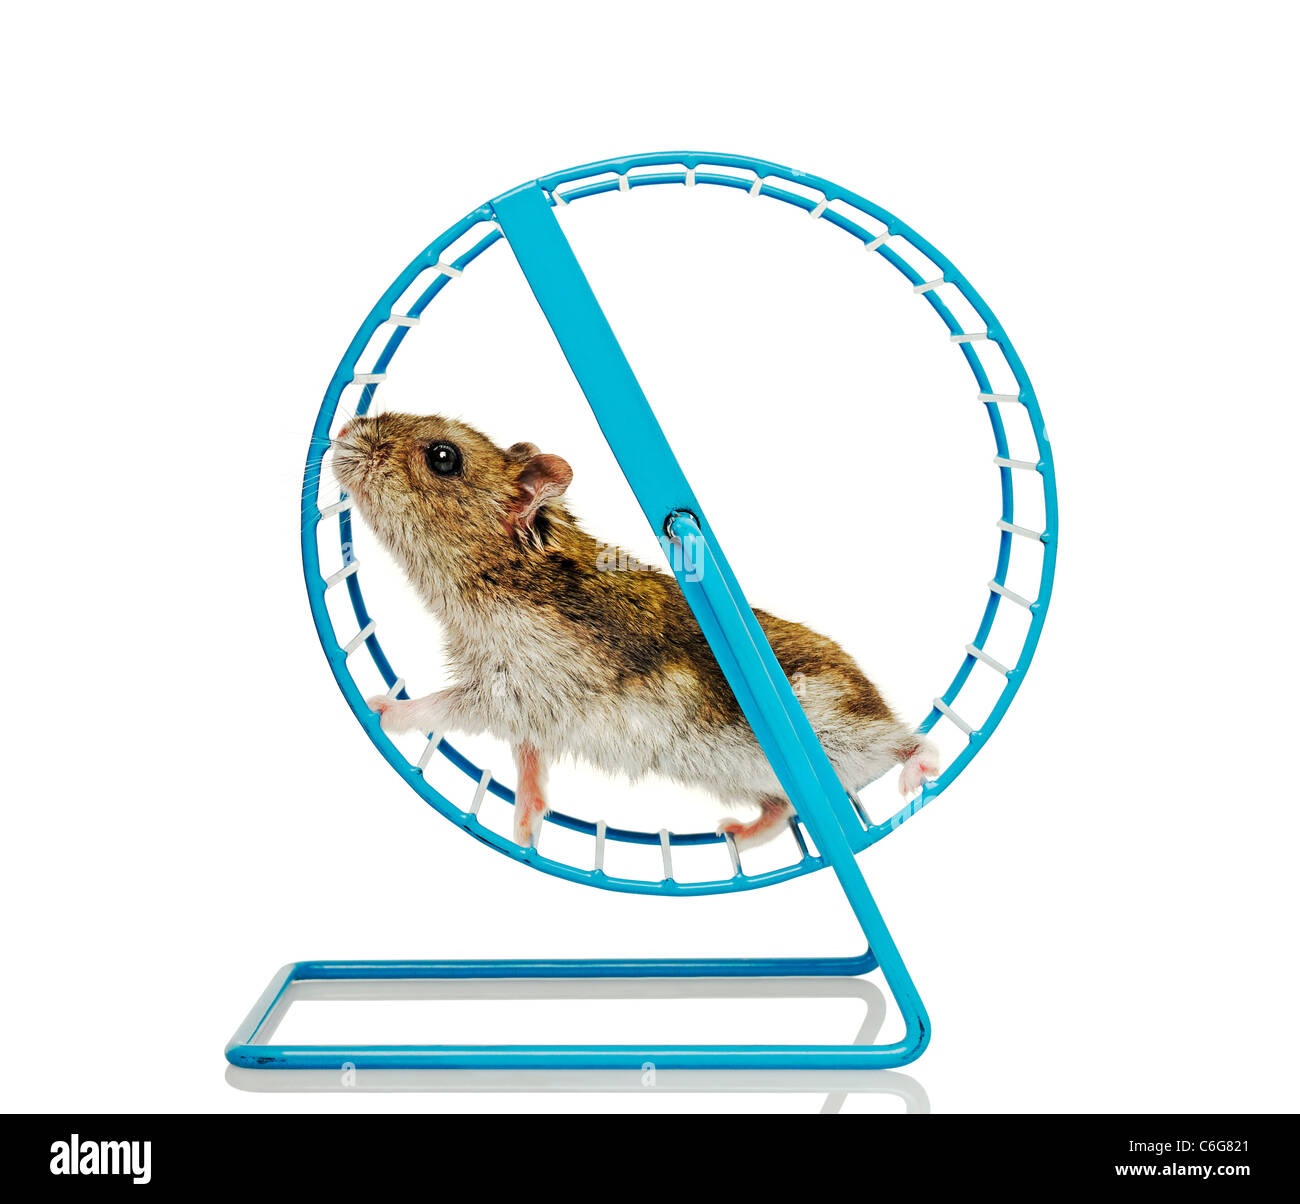 Hamster Running in a Wheel Stock Photo